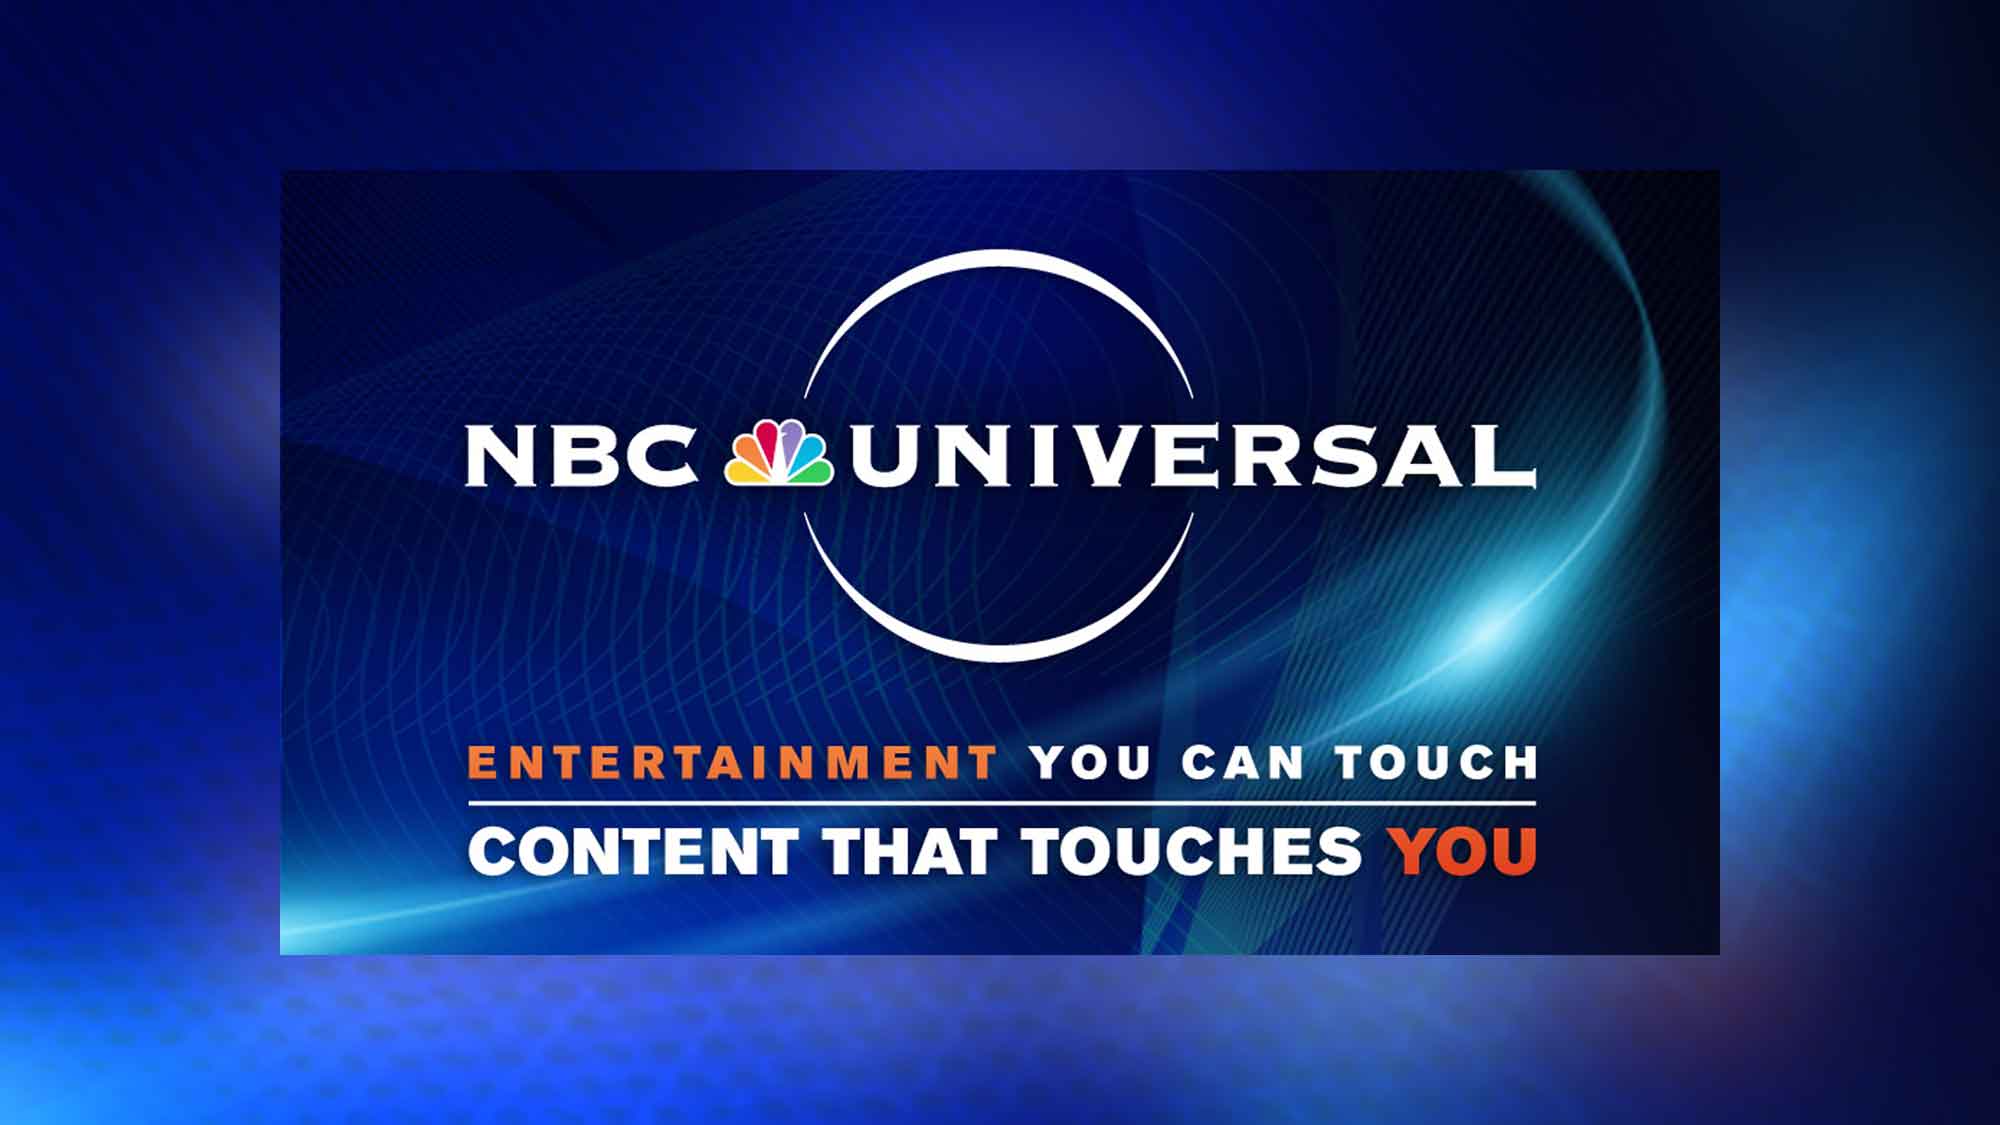 NBC Universal Becomes The First International CES Broadcast Partner